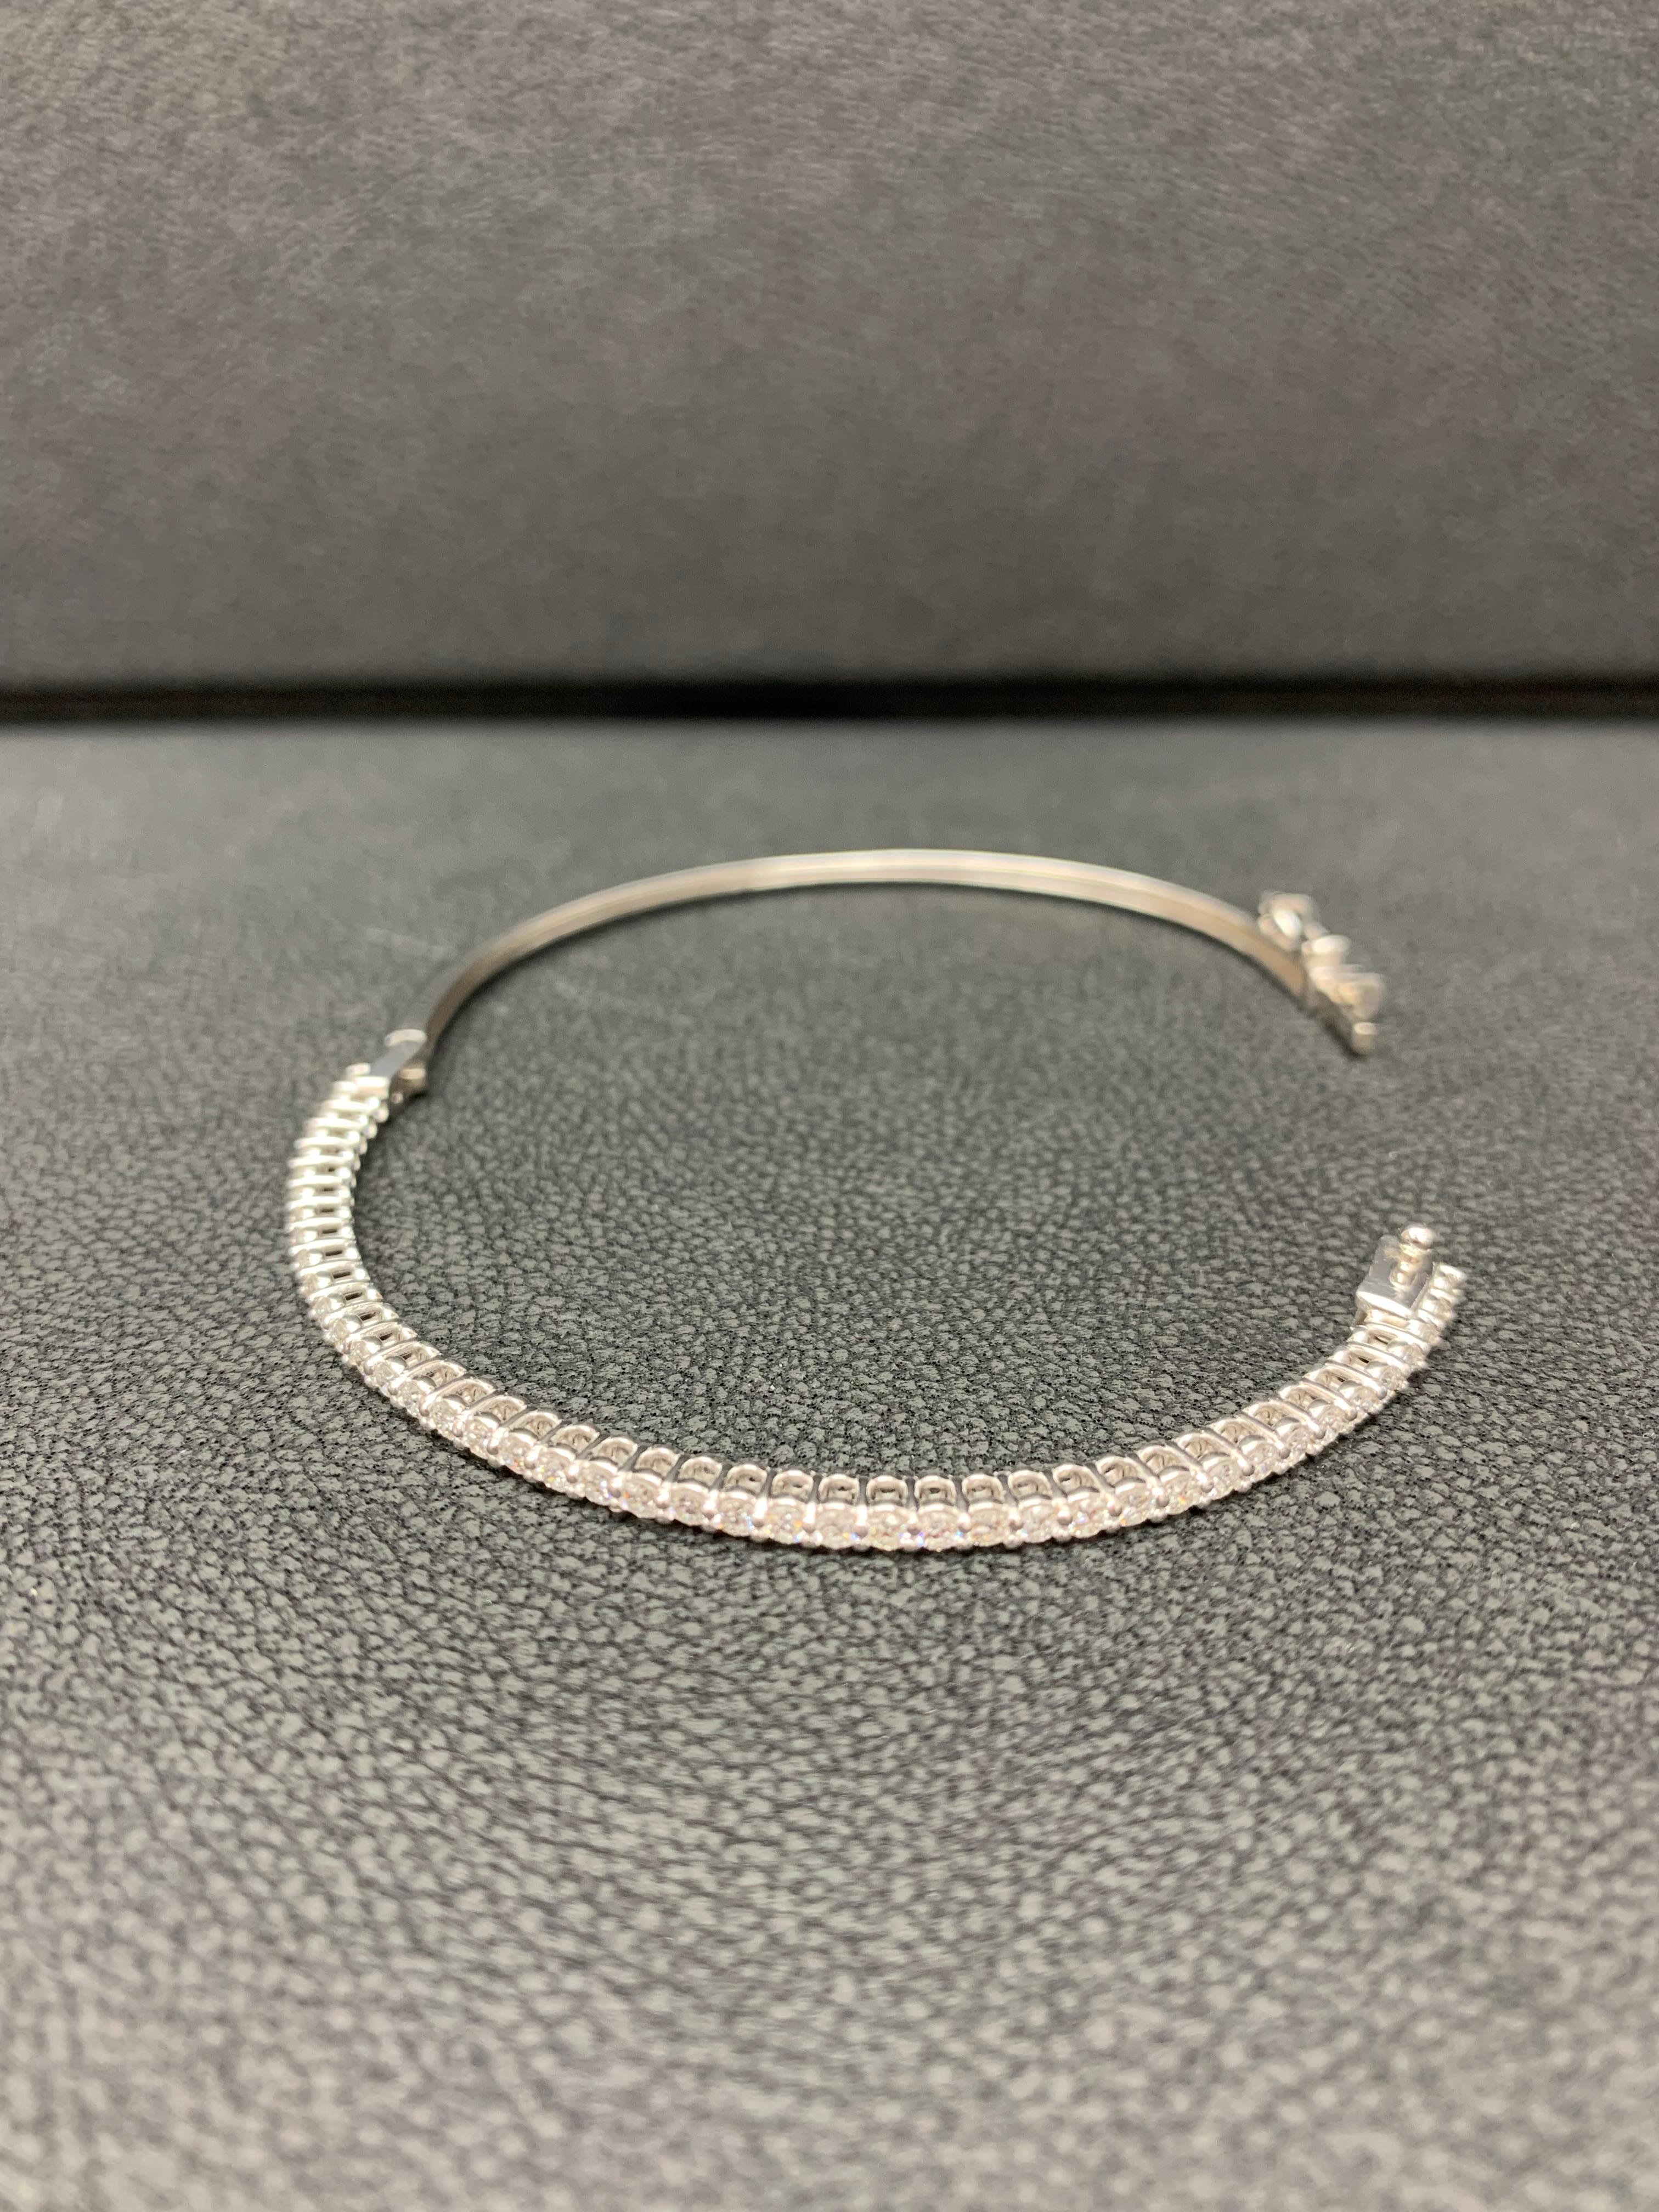 A simple but elegant bangle bracelet set with 43 round-cut diamonds weighing 1.01 carats total. Has a clasp to slip and wear the bangle securely. Made in 14k White Gold.

Style available in different price ranges. Prices are based on your selection